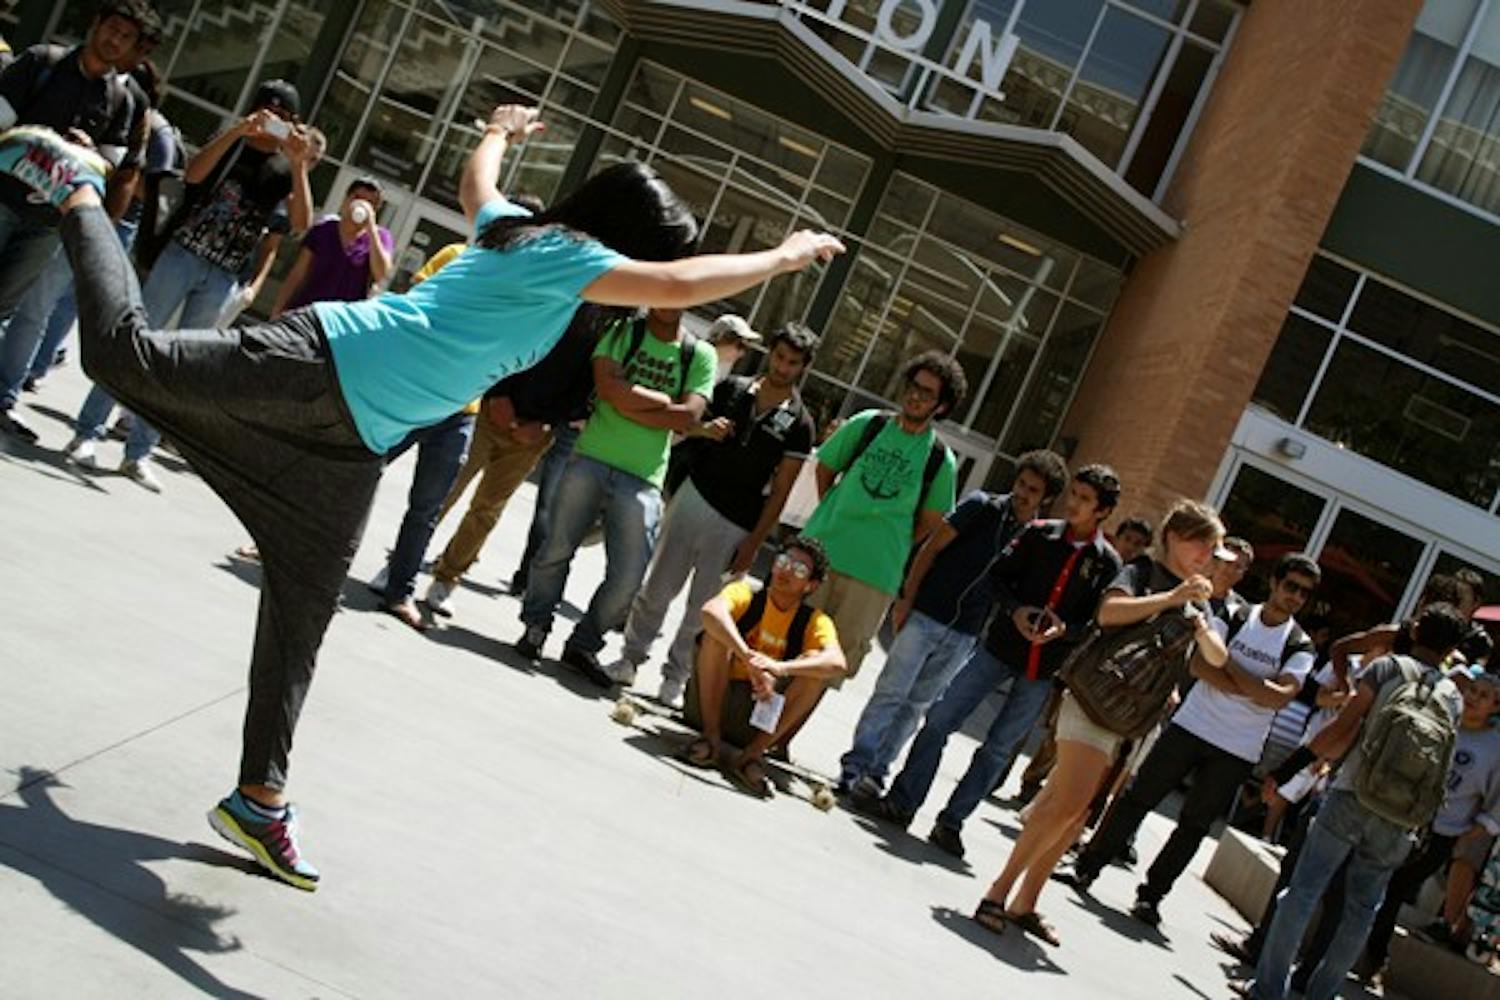 Students of the ASU dance program advertised for an event called Urban Soul, which incorporates the four elements of hip-hop, and will be held in downtown Phoenix on Saturday. (Photo by Jessie Wardarski)